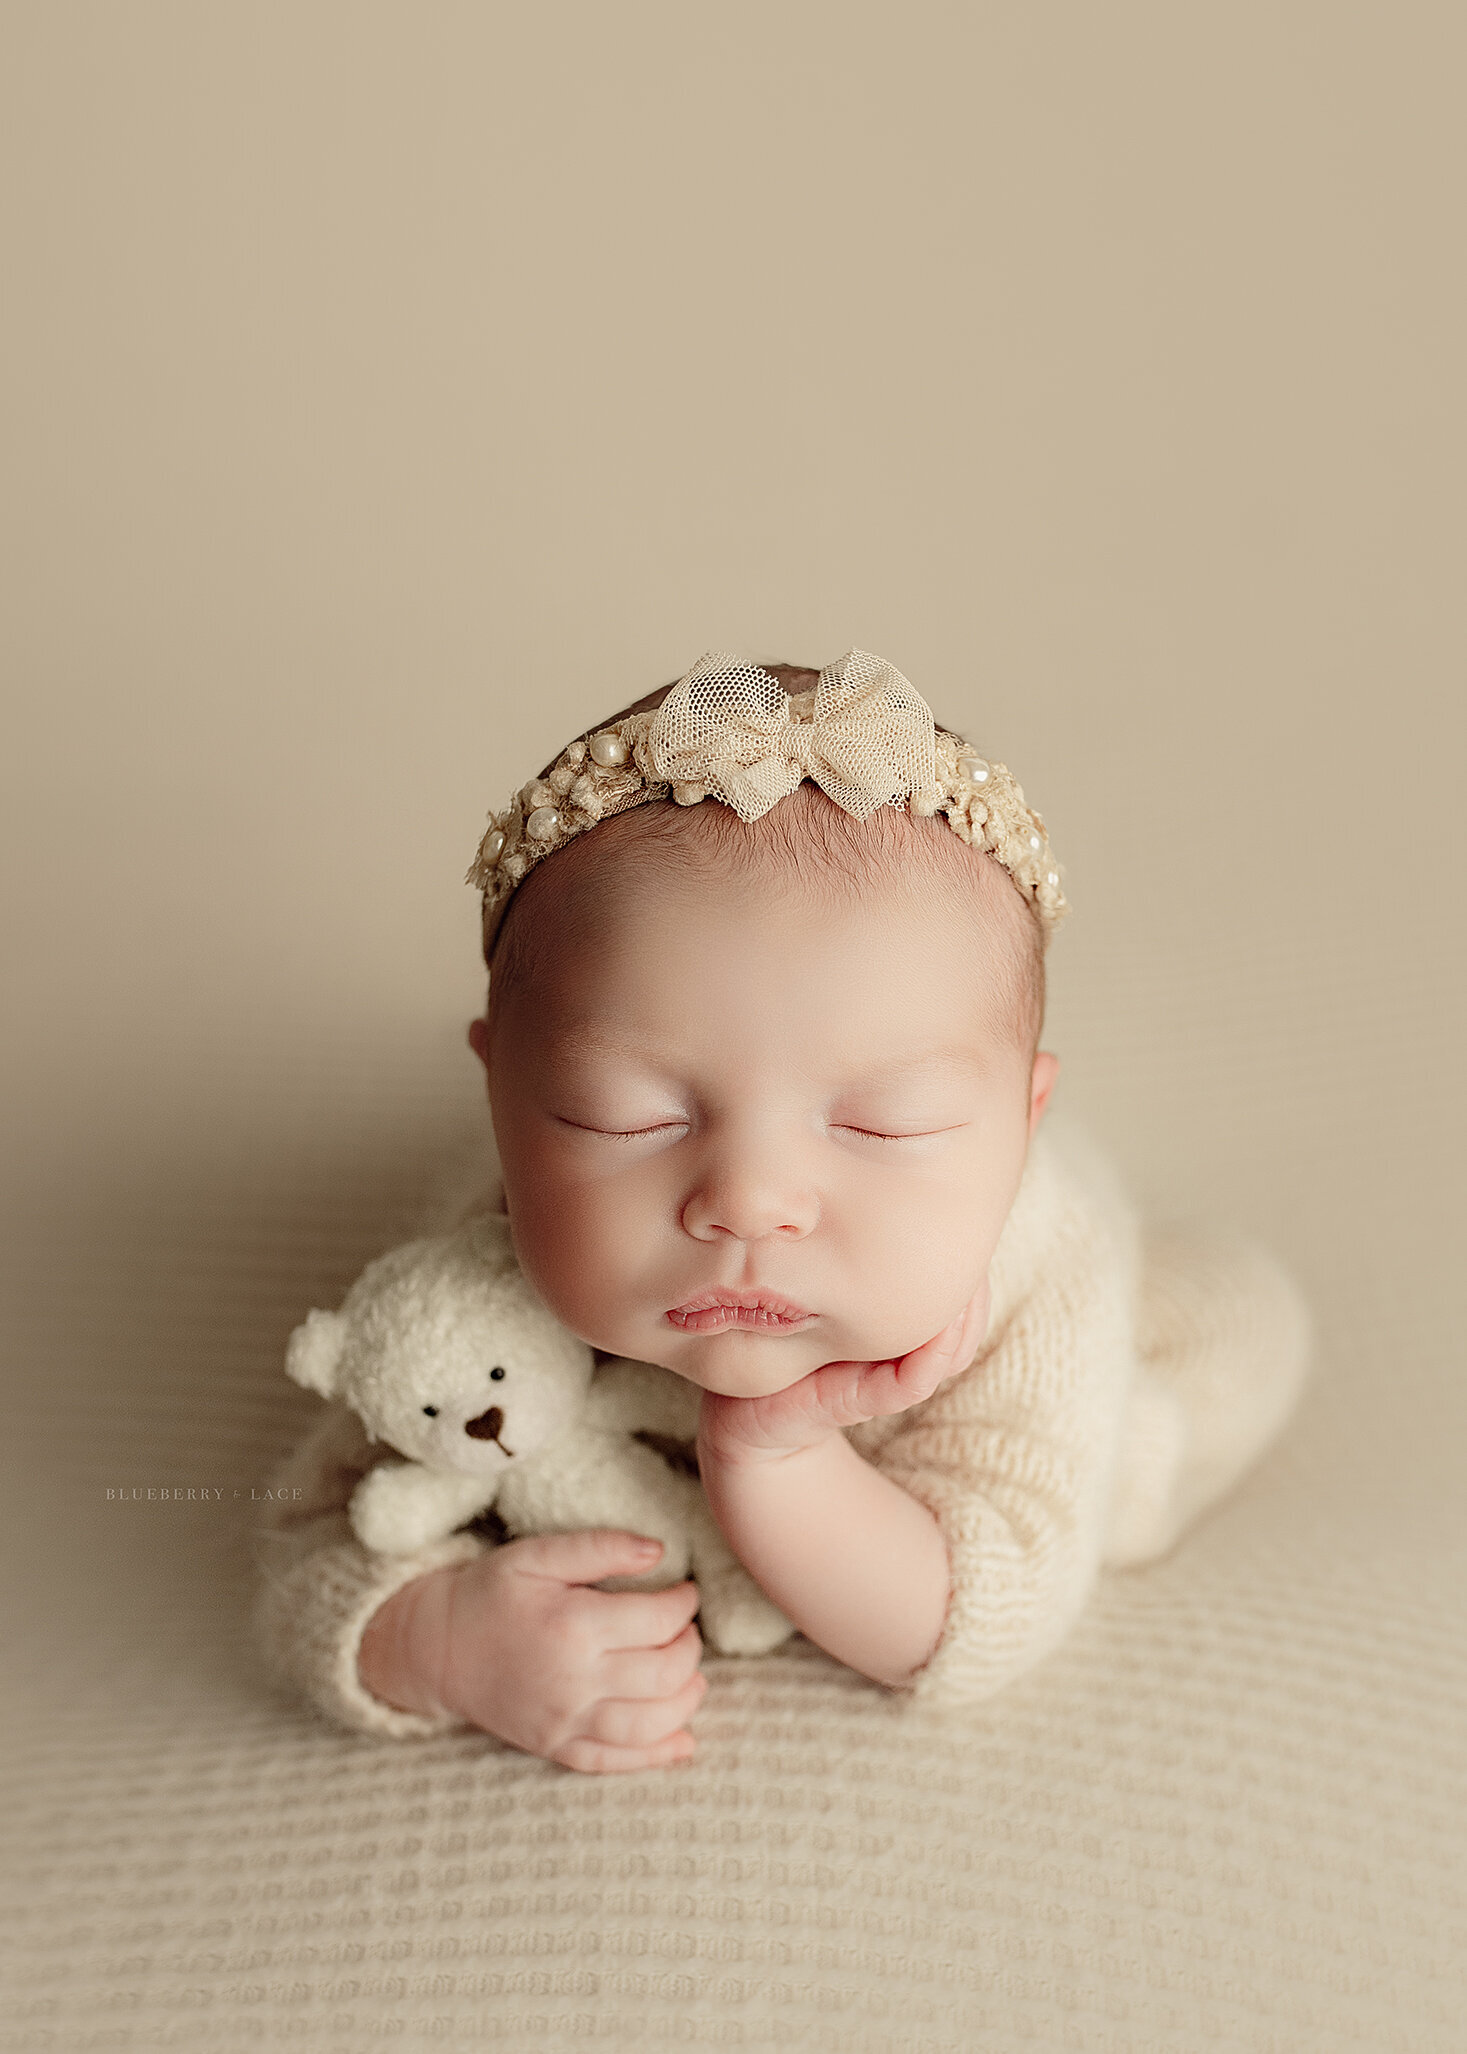 sweet baby girl posed in oswego ny newborn photography studio in cream and neutrals with modern art